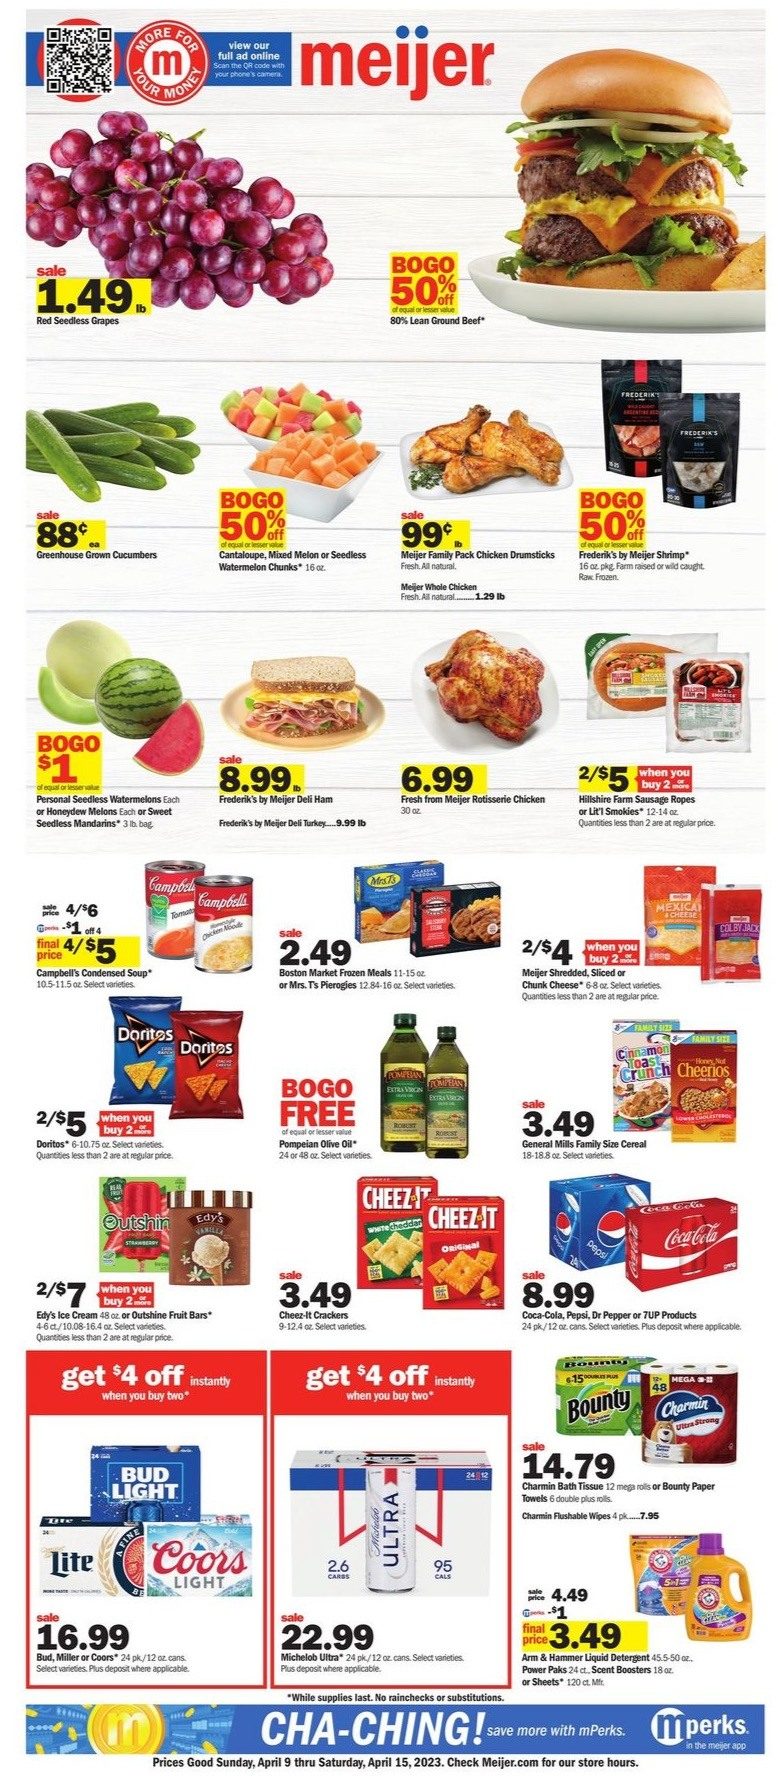 Meijer Weekly Ad Easter 9th – 15th April 2023 Page 1